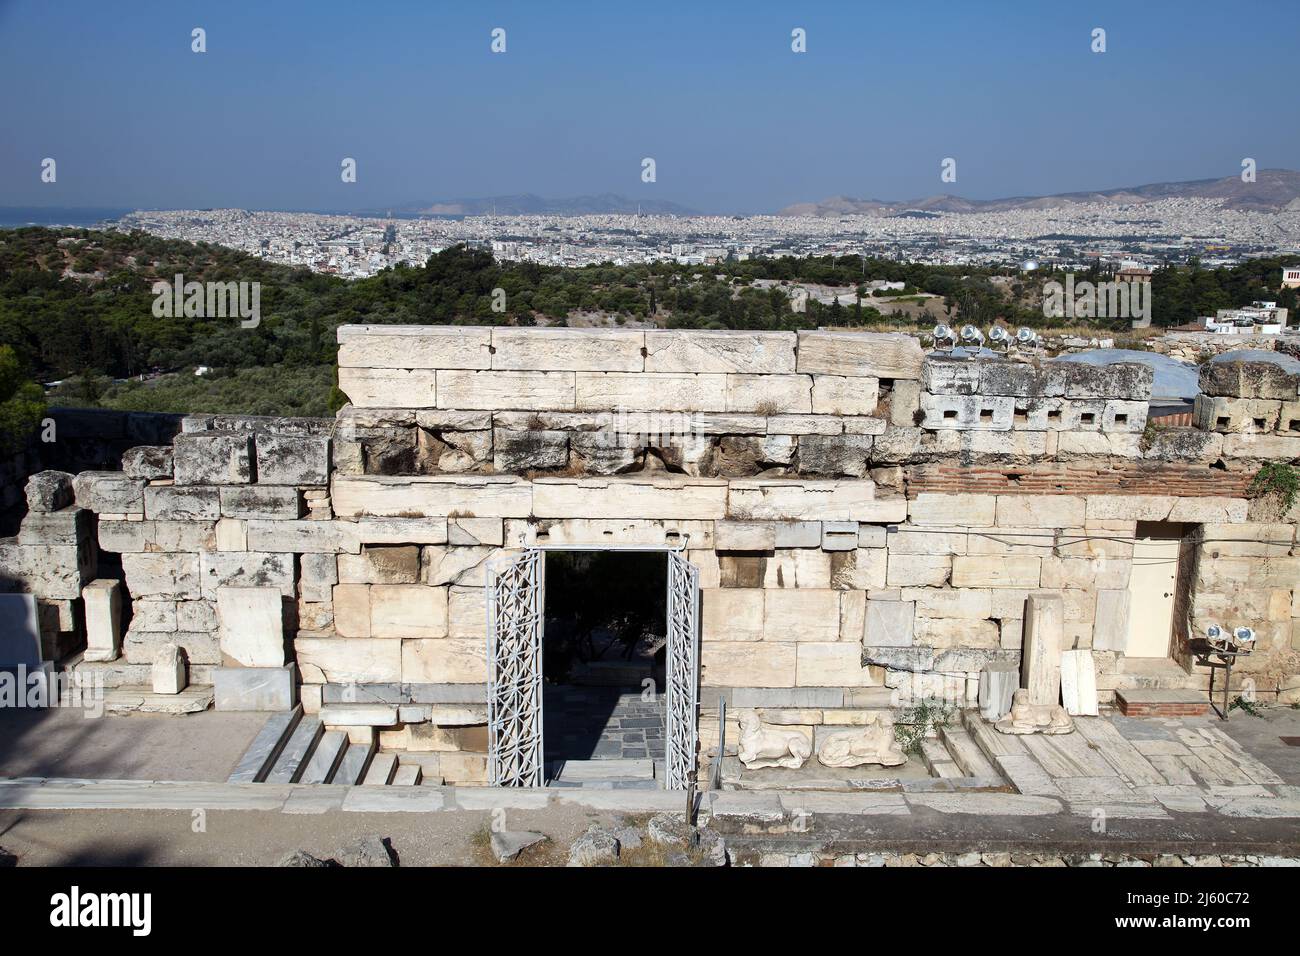 Beule Gate at Acropolis in Athens, Greece. This Roman-era doorway was named after the 19th-century French archaeologist who discovered it. Stock Photo